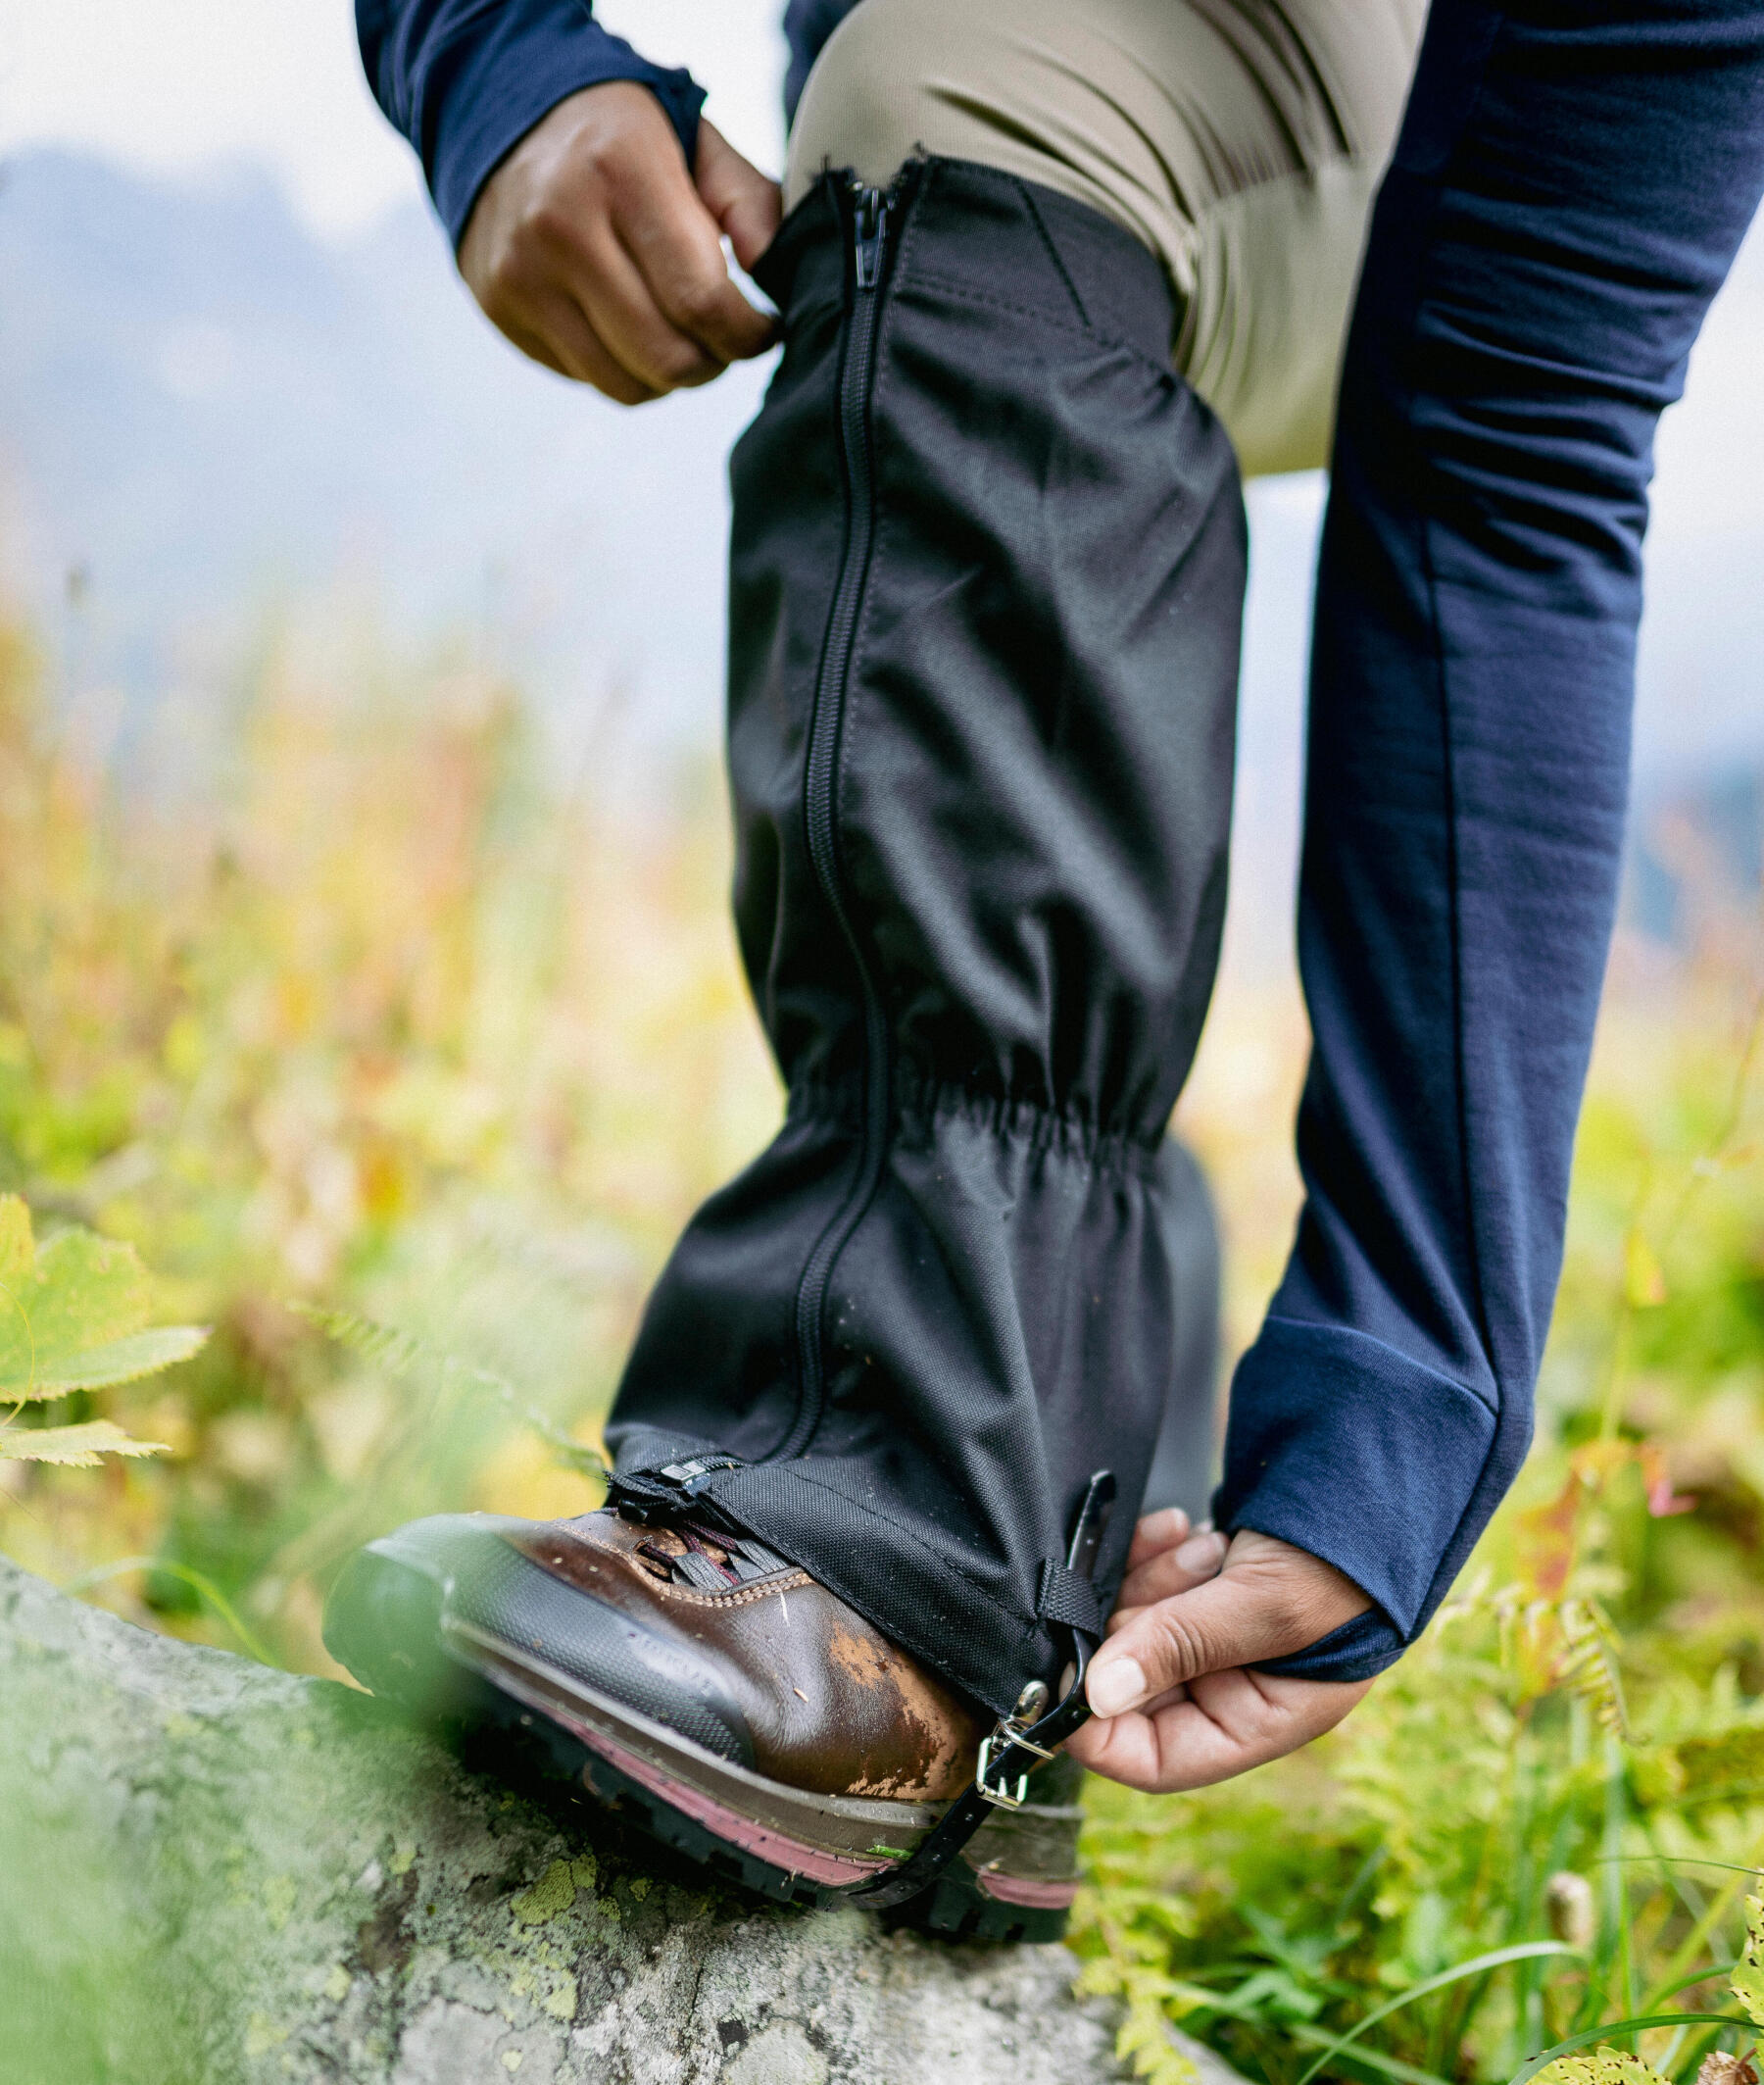 What are hiking gaiters for?